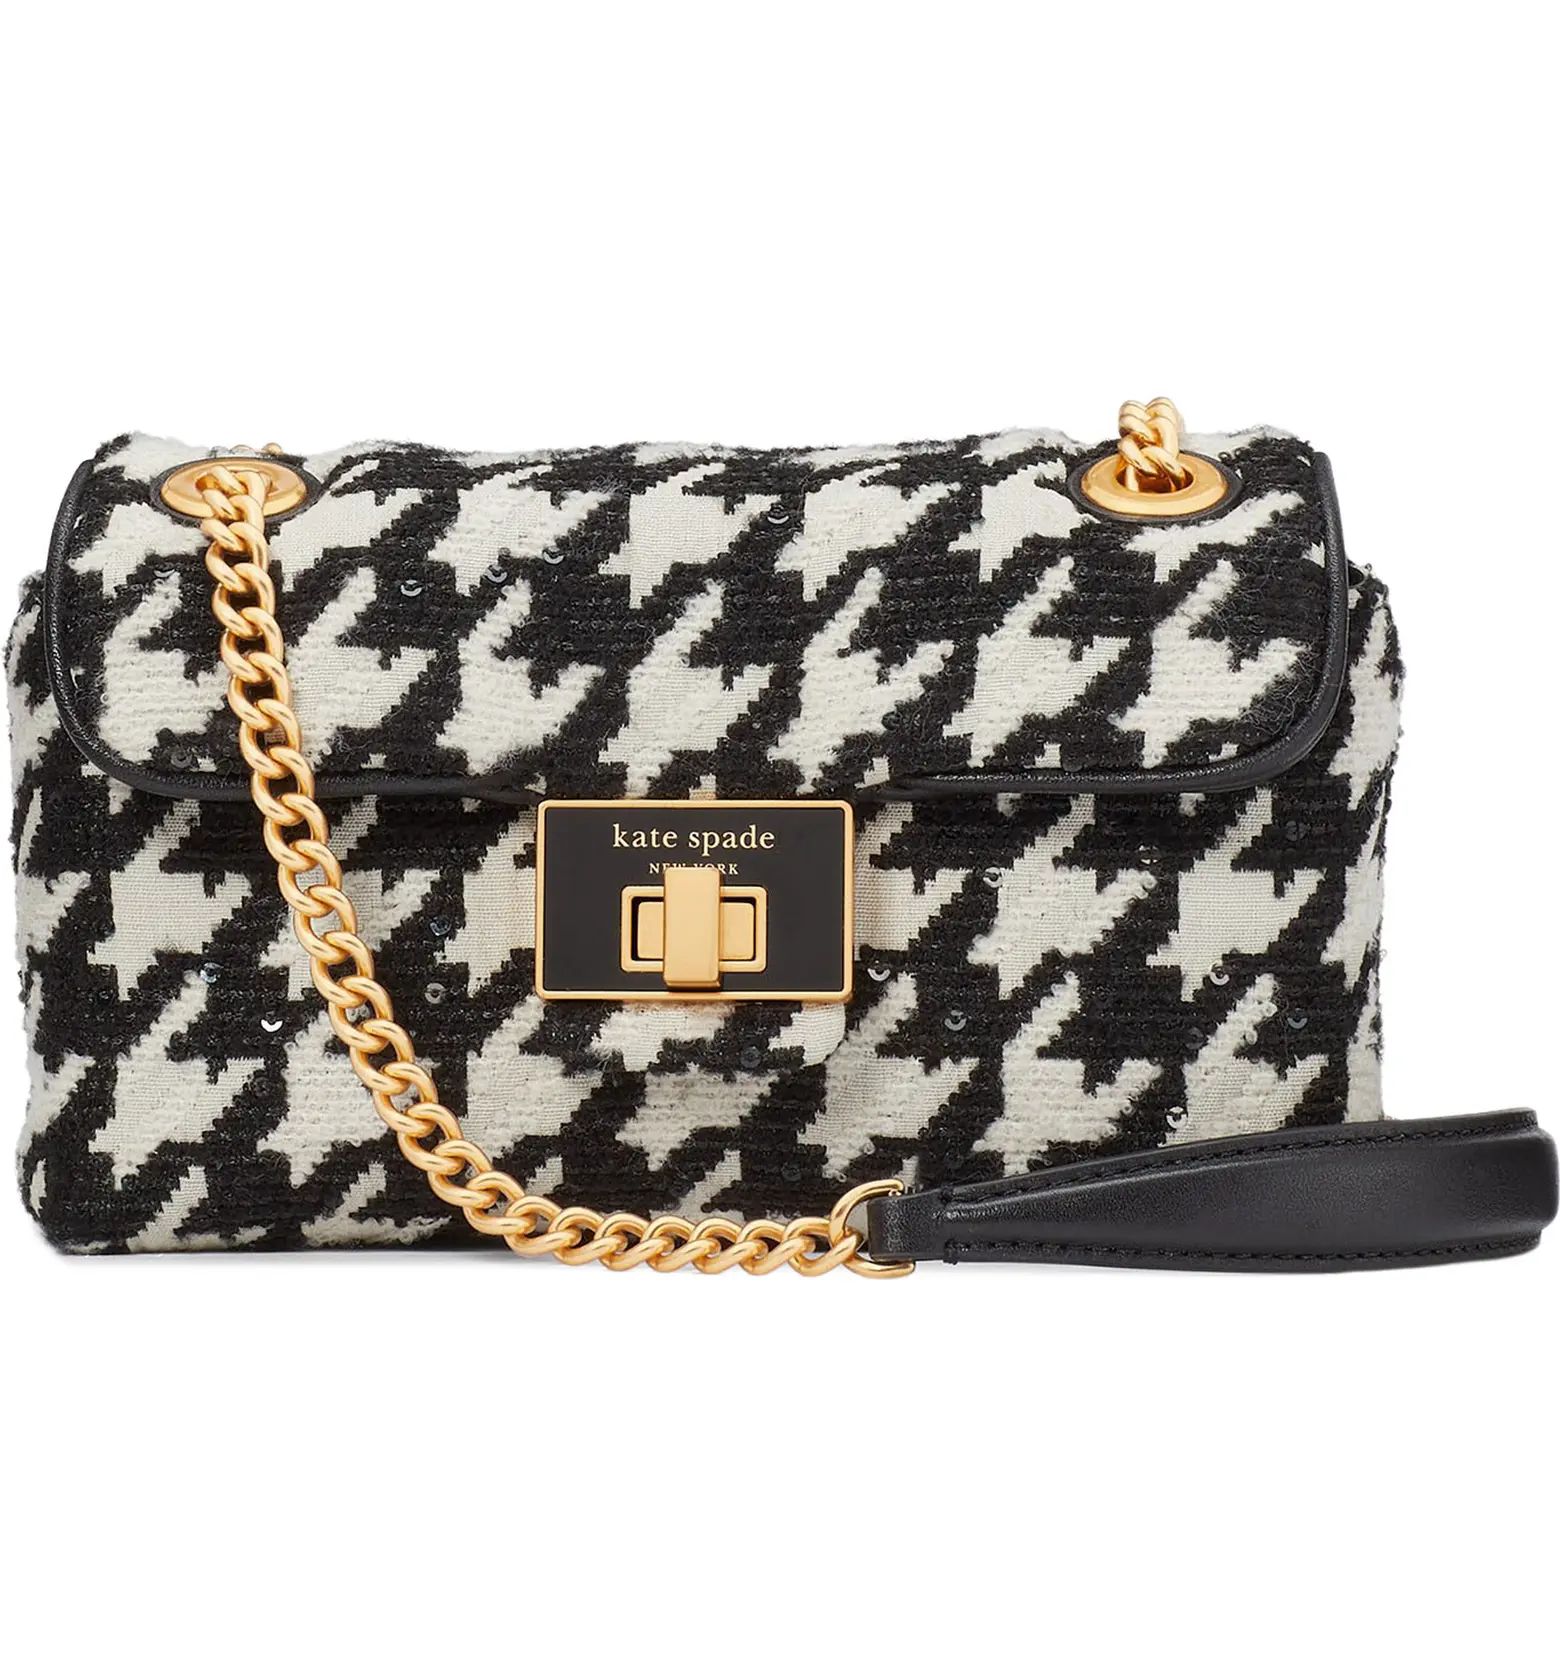 evelyn sequin houndstooth convertible crossbody bag | Nordstrom